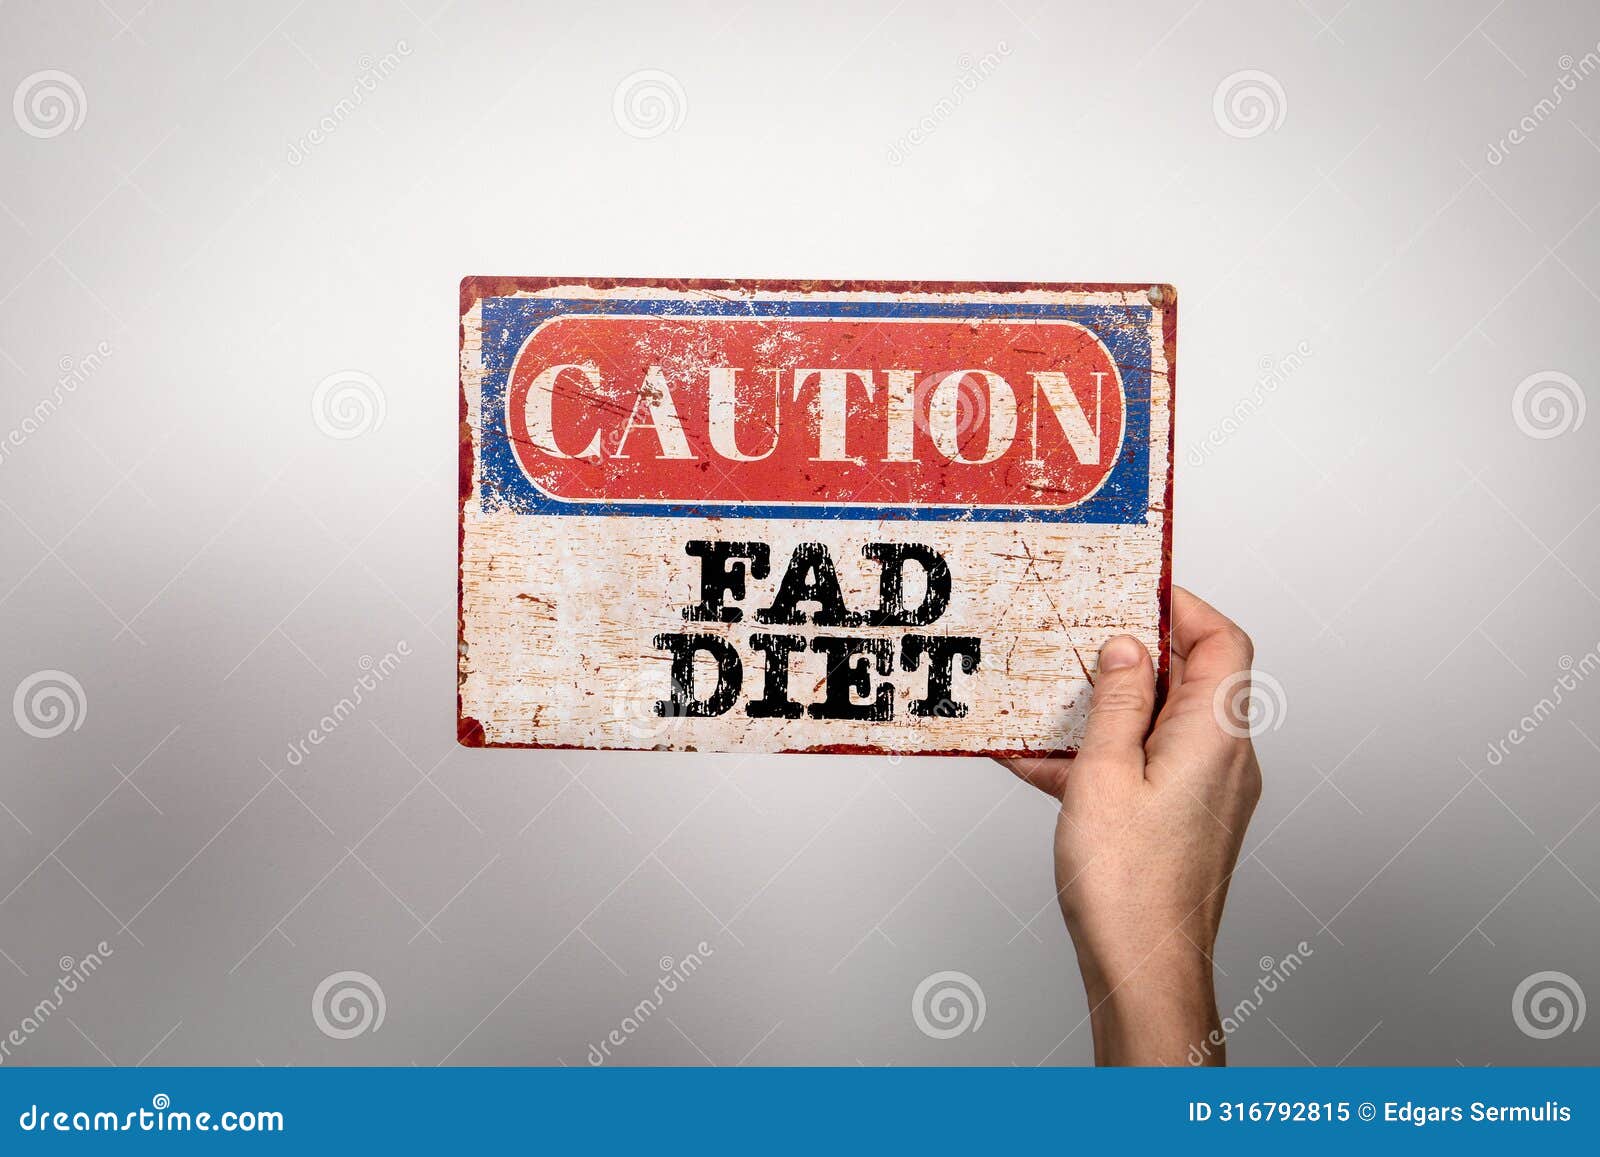 fad diet. metal warning sign in a woman's hand on a white background